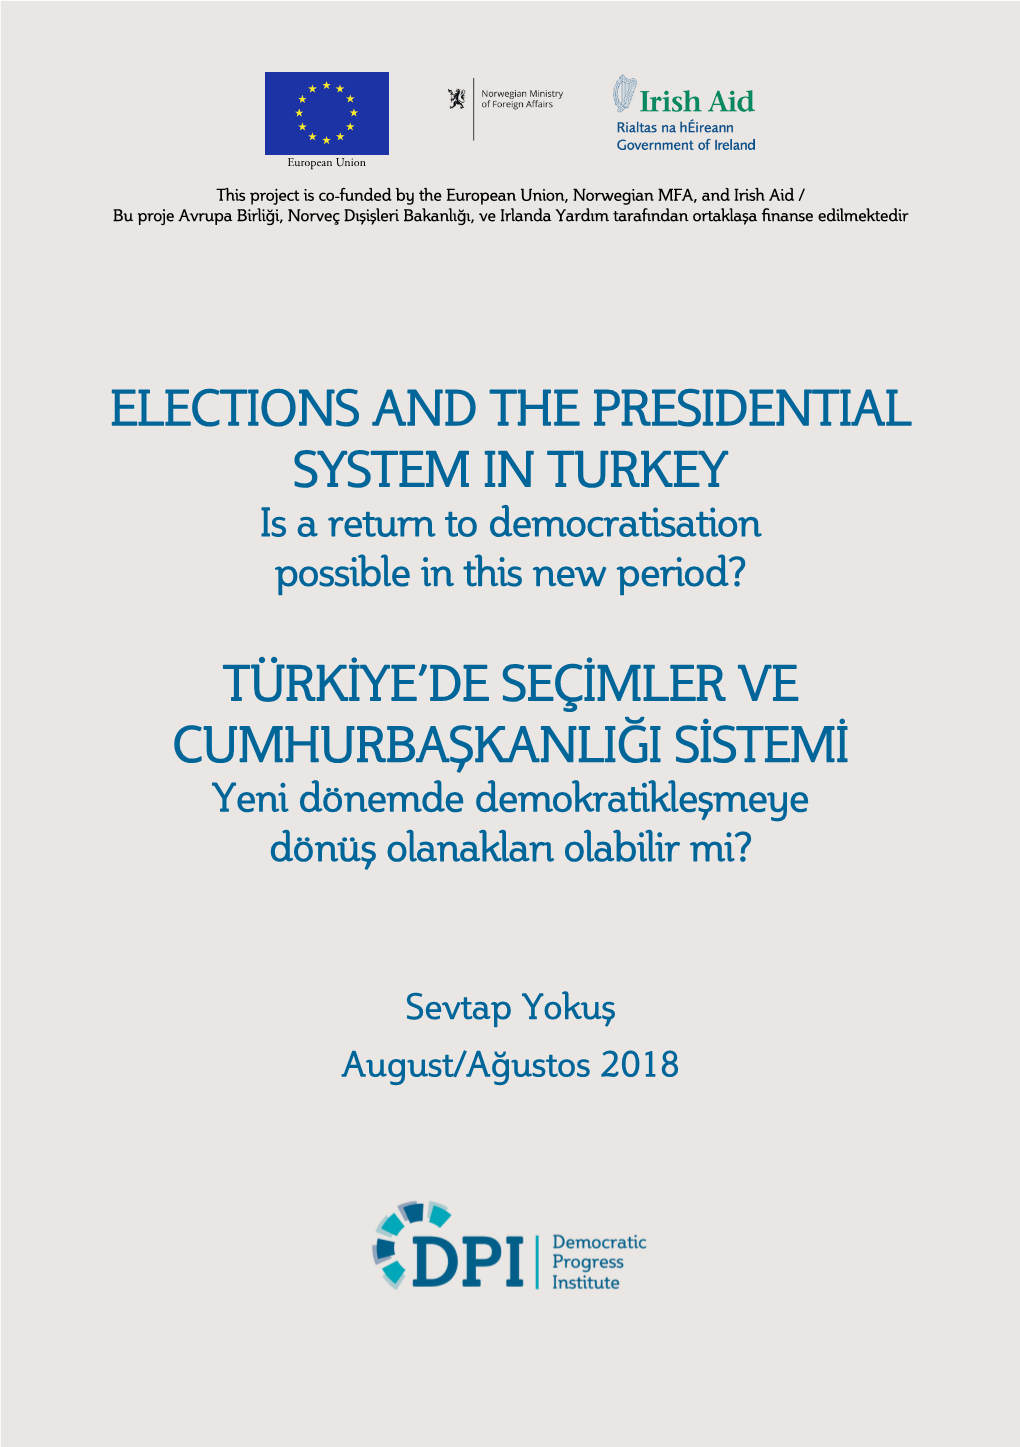 ELECTIONS and the PRESIDENTIAL SYSTEM in TURKEY Is a Return to Democratisation Possible in This New Period?